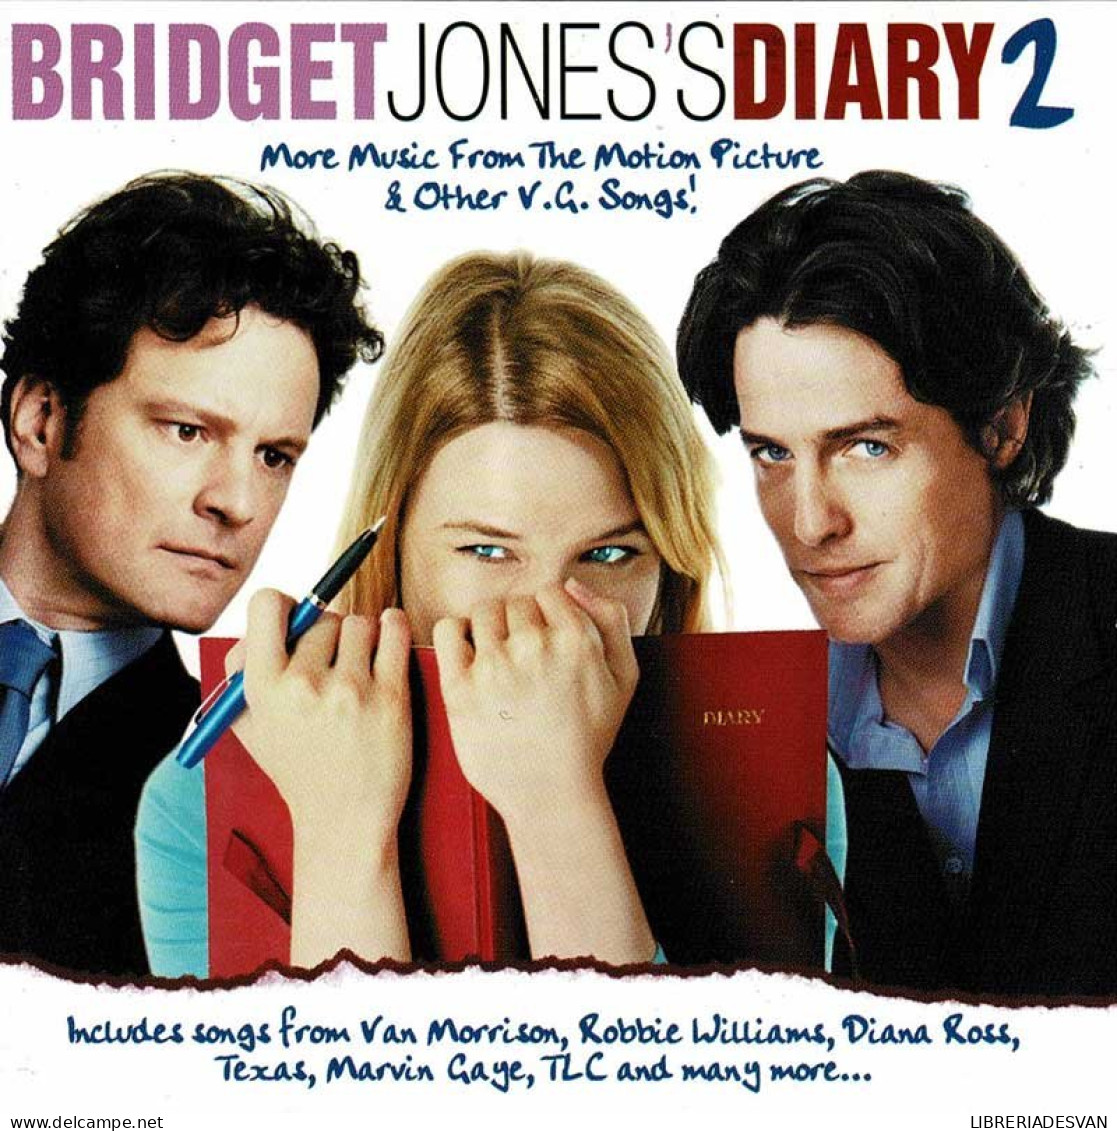 Bridget Jones's Diary 2 (More Music From The Motion Picture & Other V. G. Songs). CD - Soundtracks, Film Music